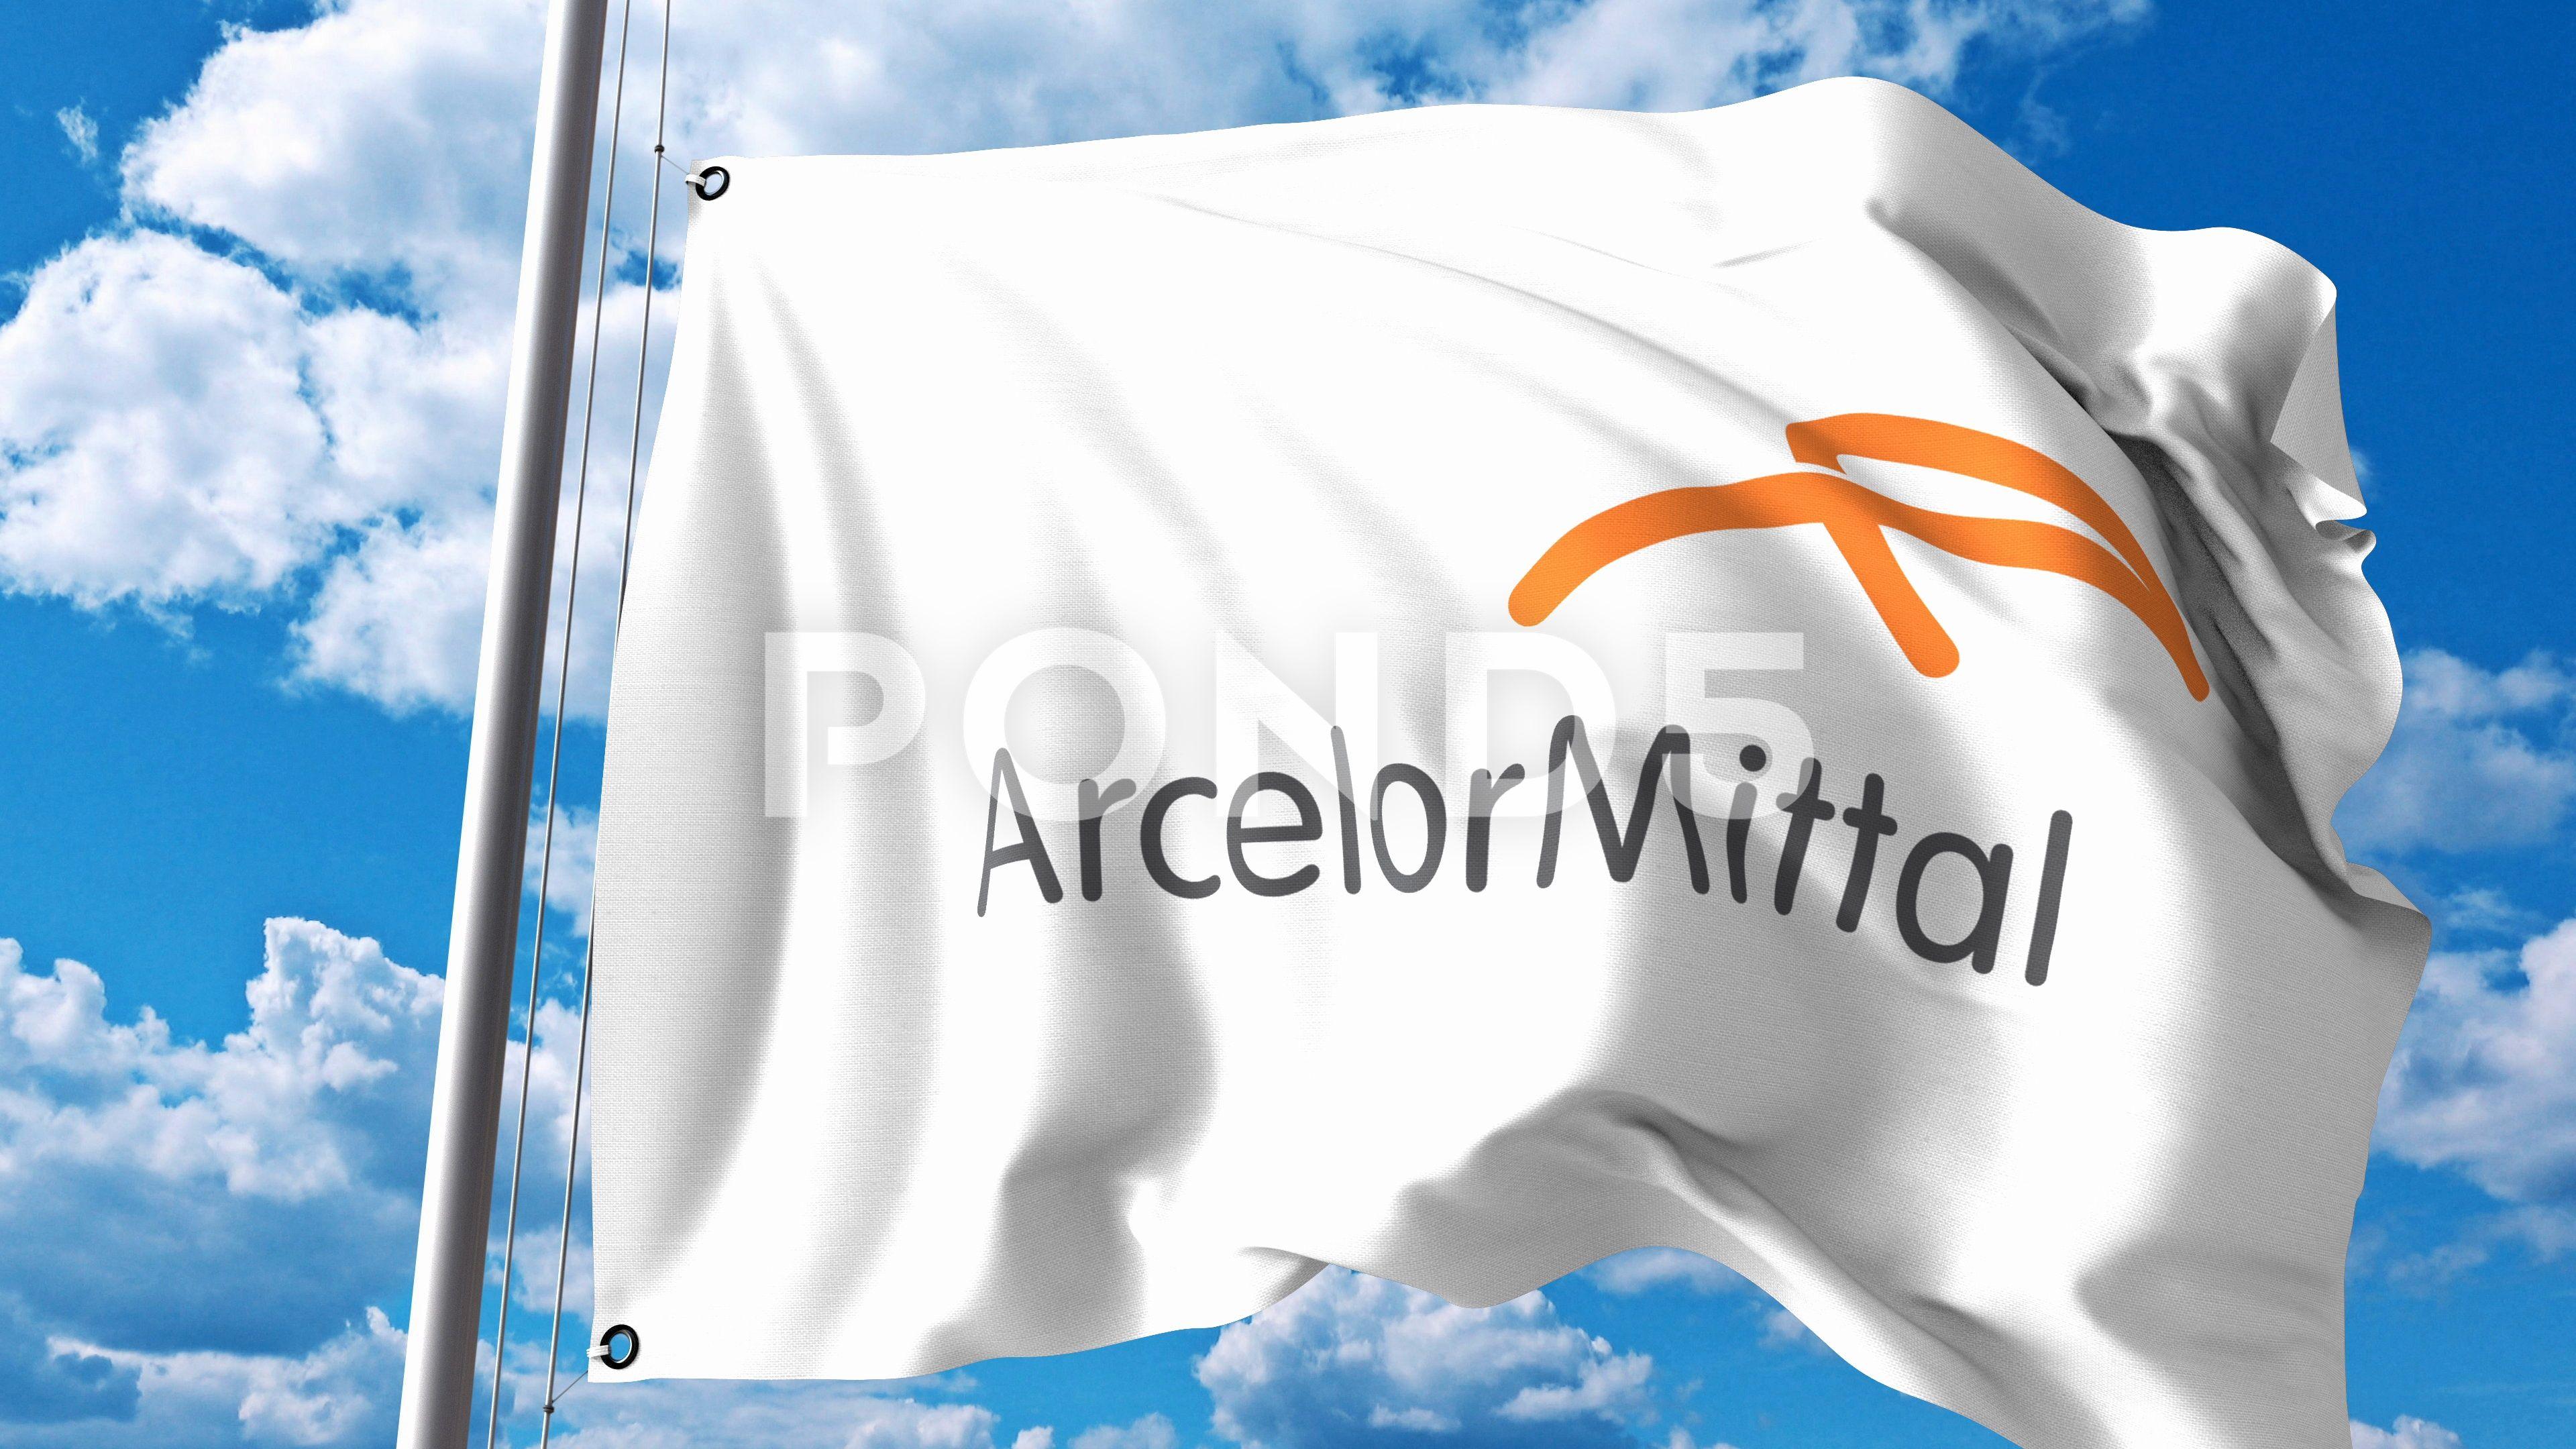 ArcelorMittal Logo - Video: Waving flag with ArcelorMittal logo against clouds and sky